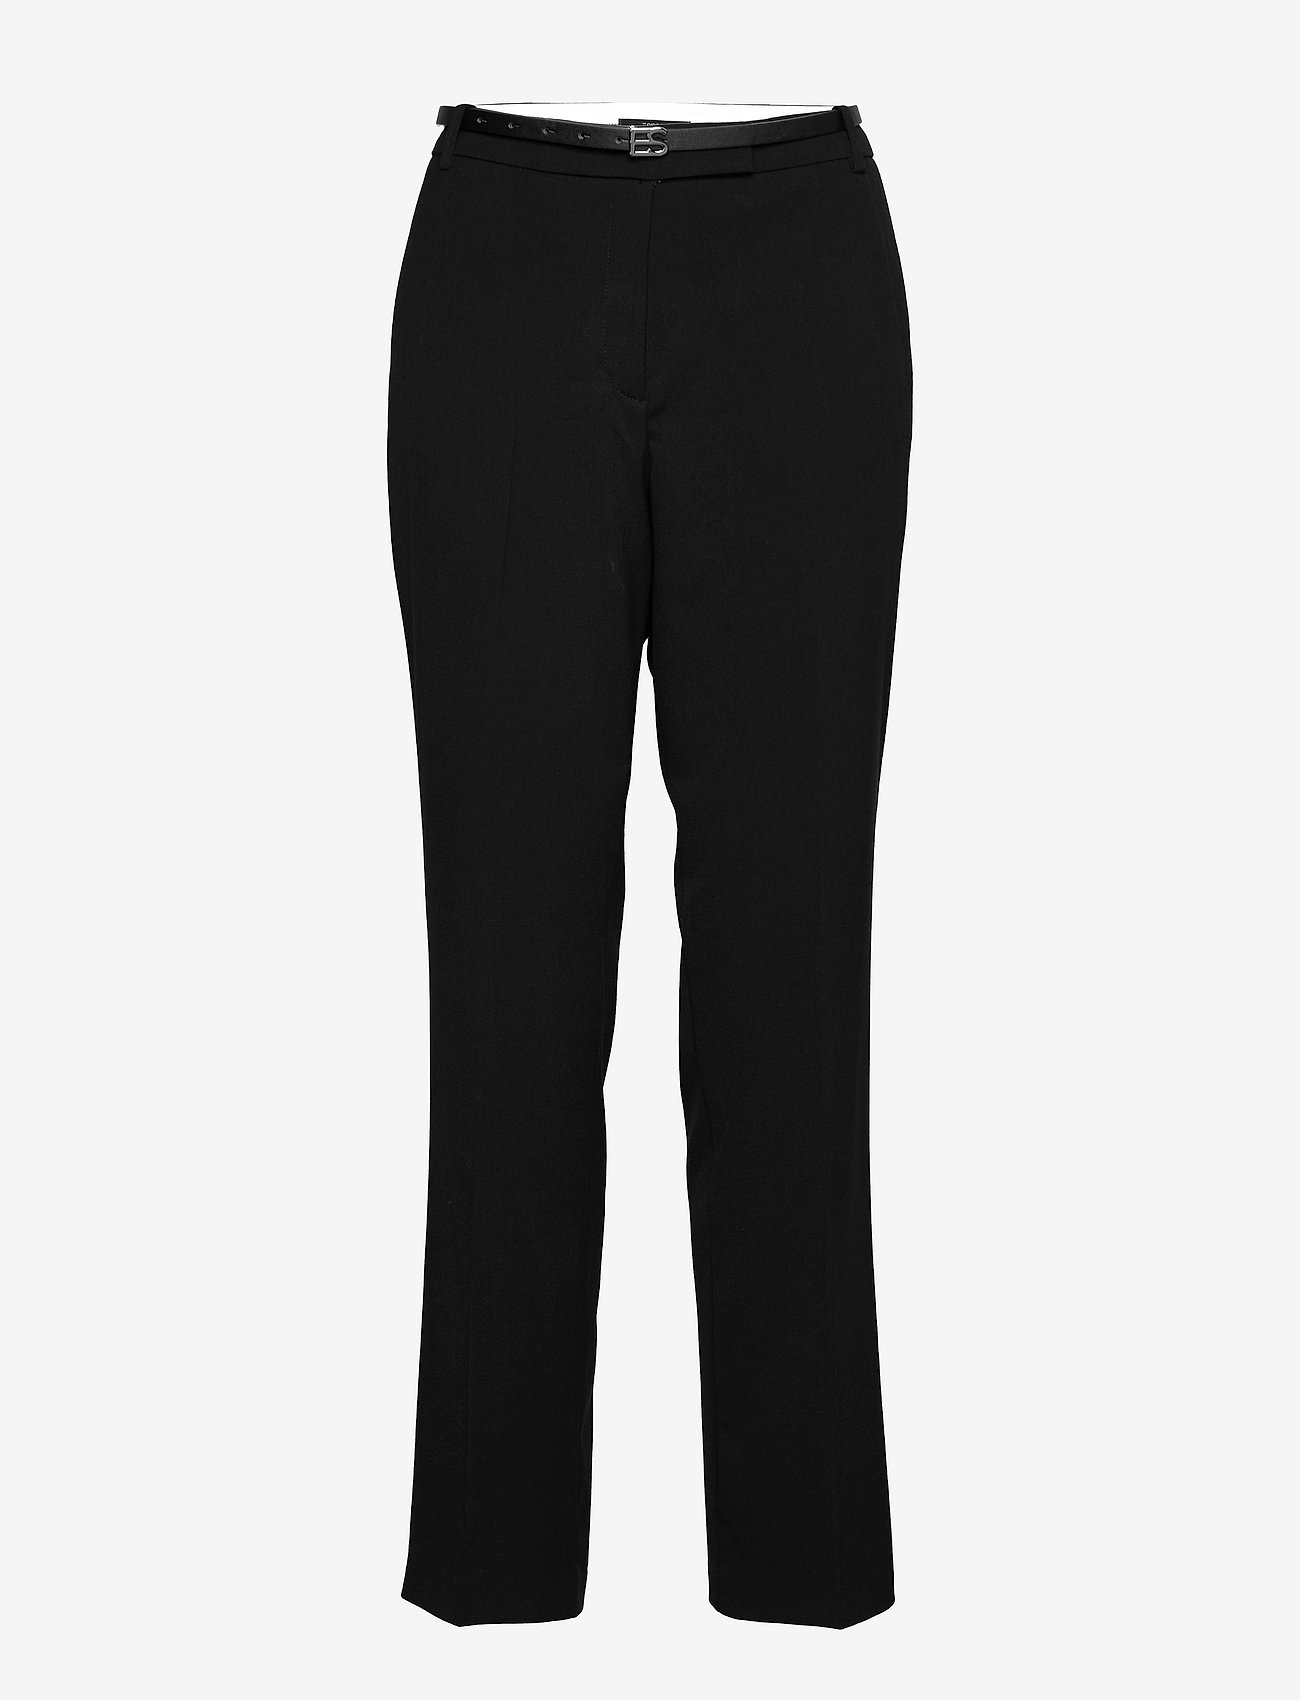 Esprit Collection - Pants woven - tailored trousers - black - 0